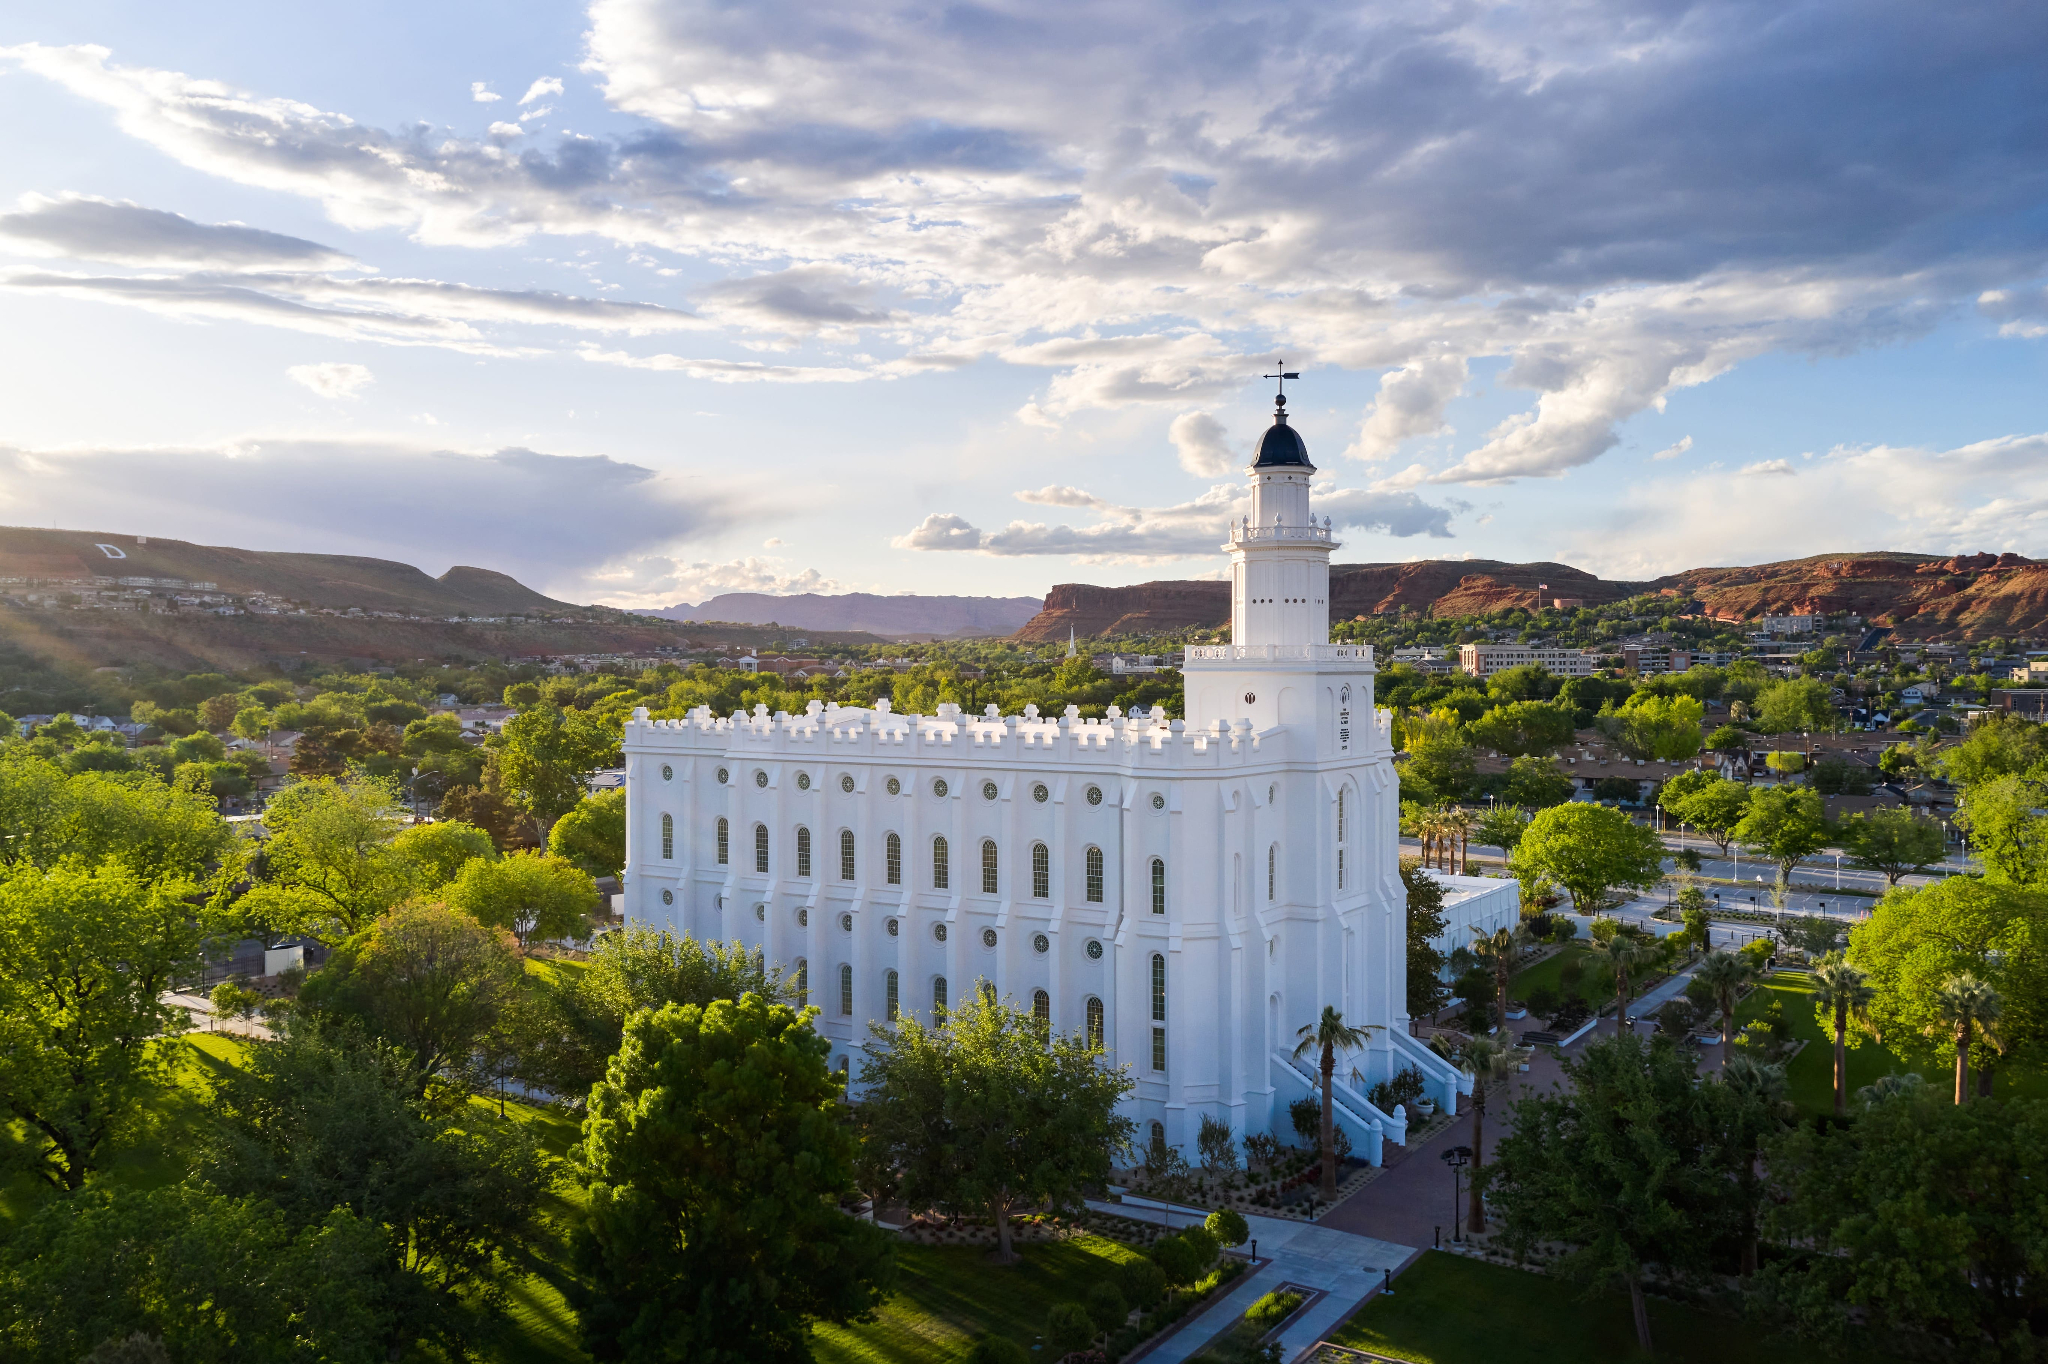 The exterior of the St. George Utah Temple, a white rectangular building with a domed spire and blue cap on one side.